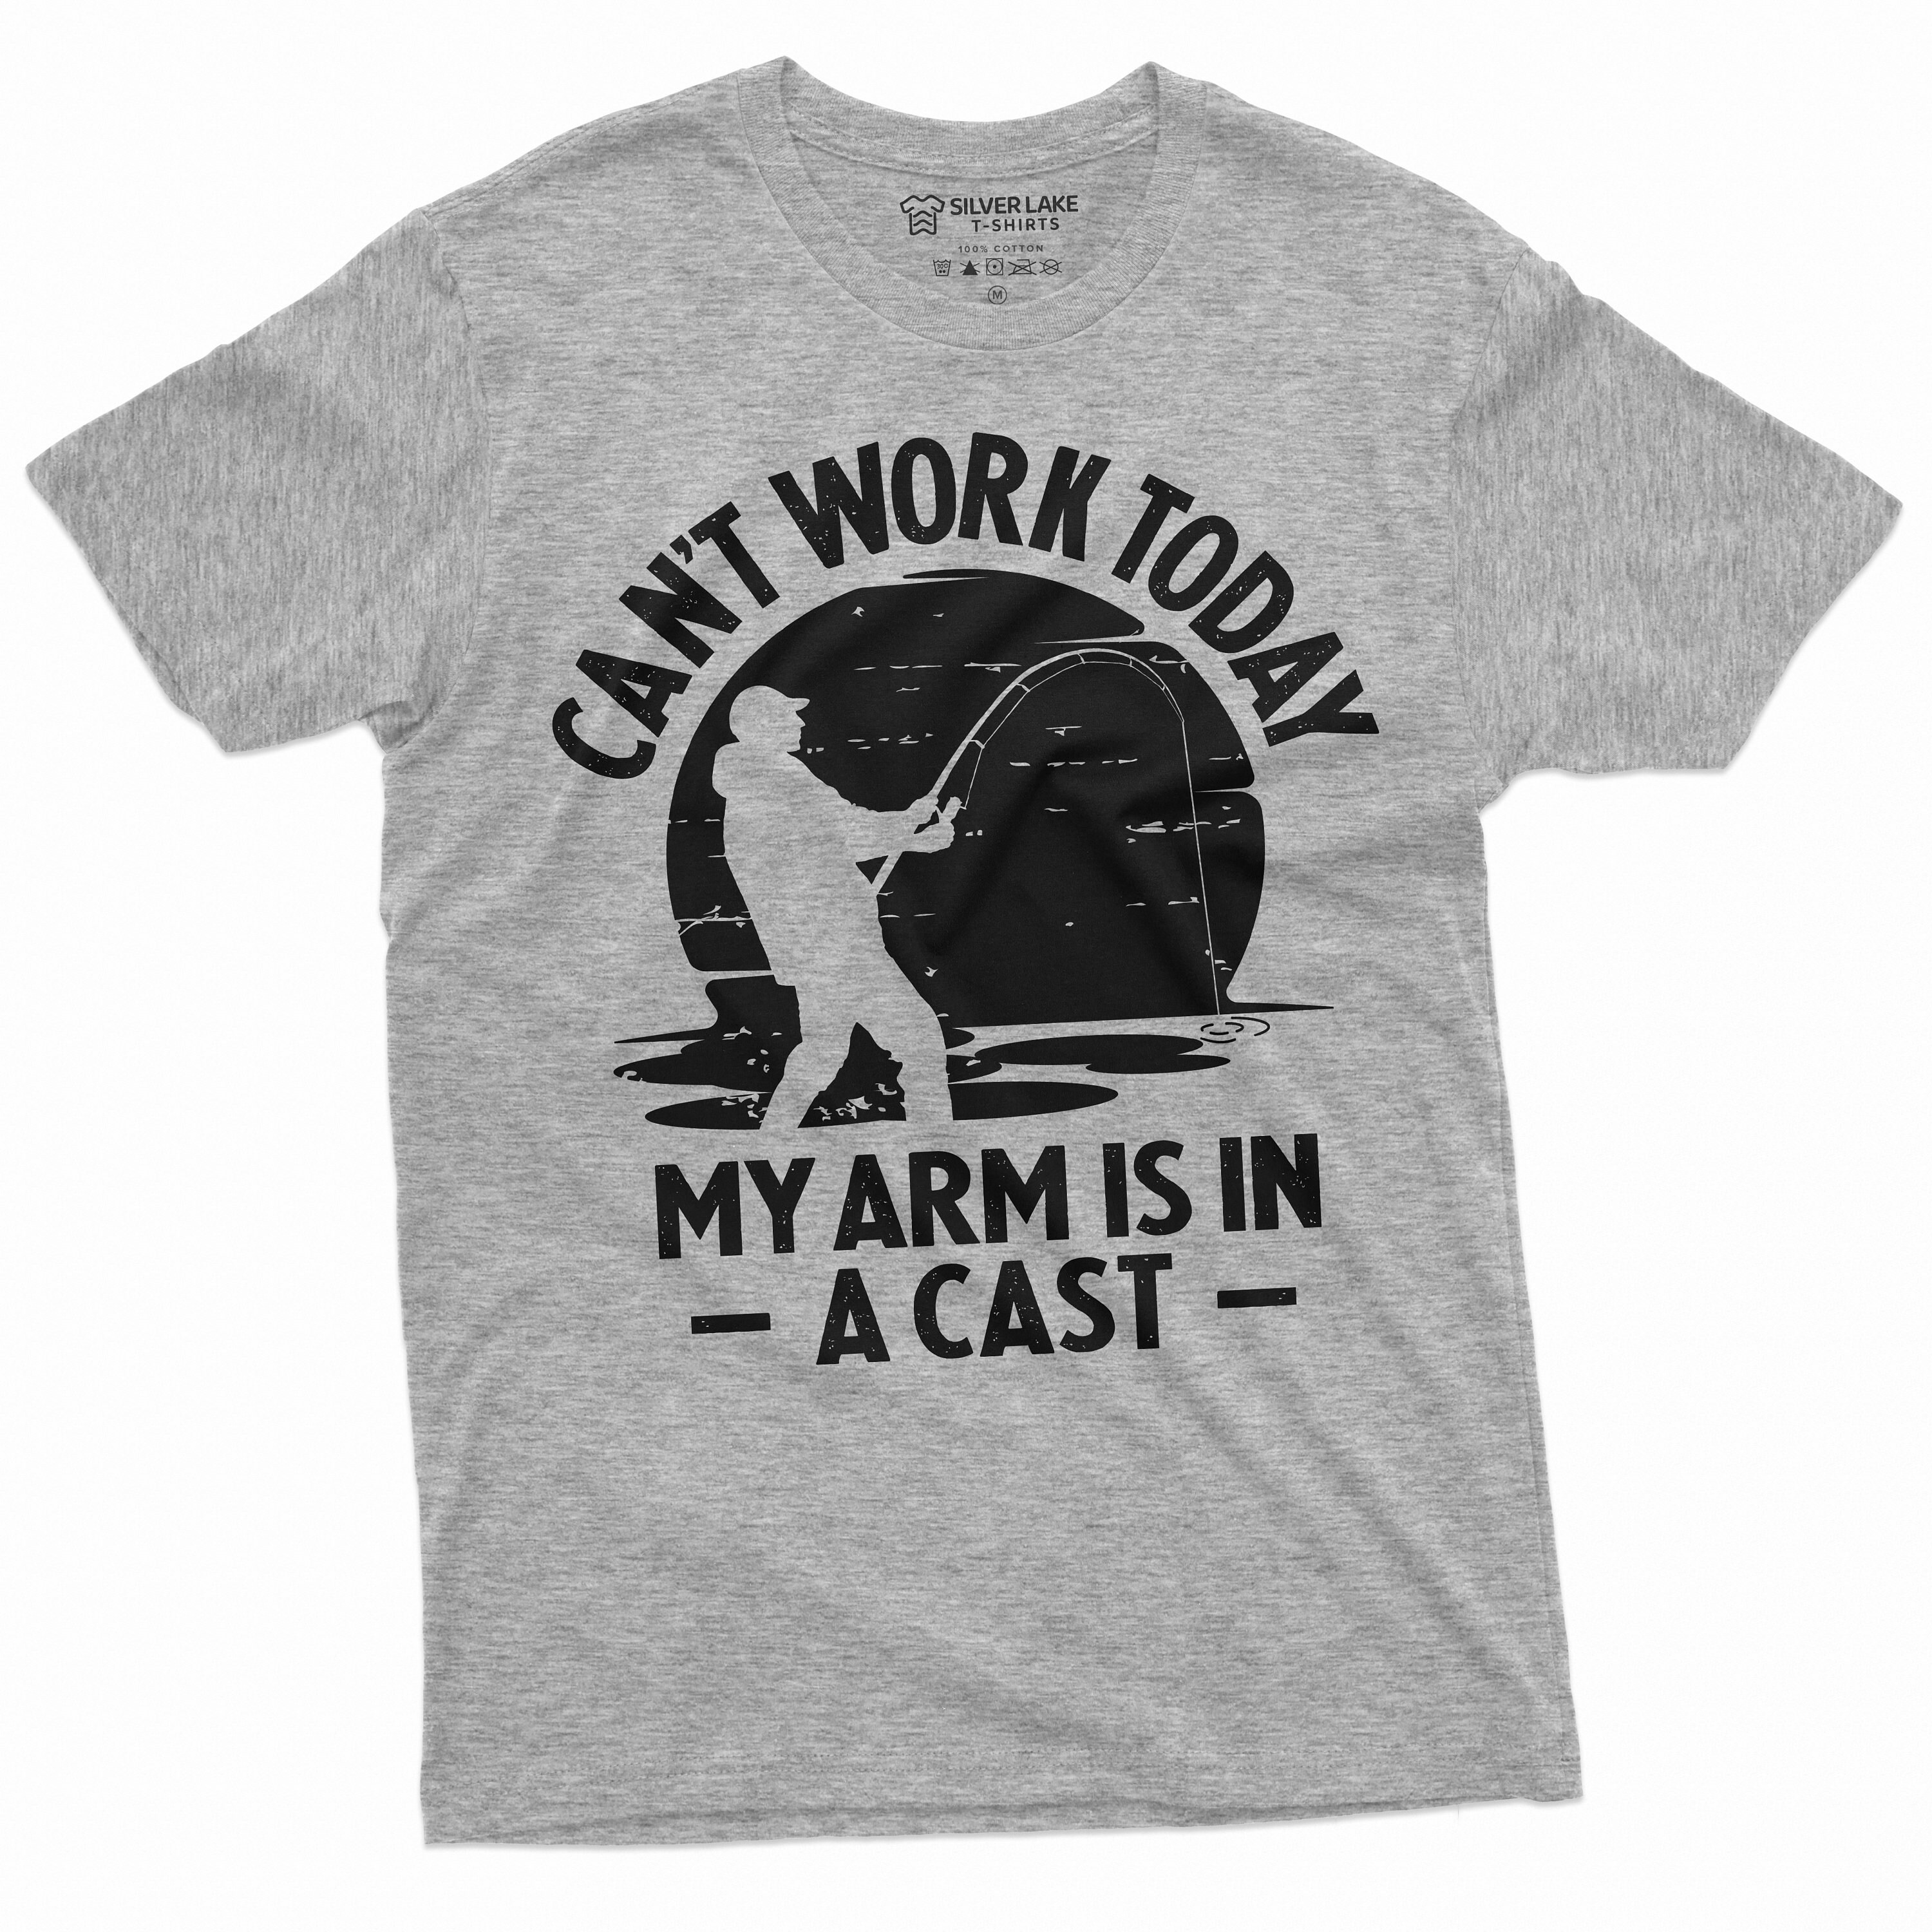 I Cant Work My Arm Is in A Cast, Mens Fishing Shirt, Funny Fishing Shirt Navy / 2XL